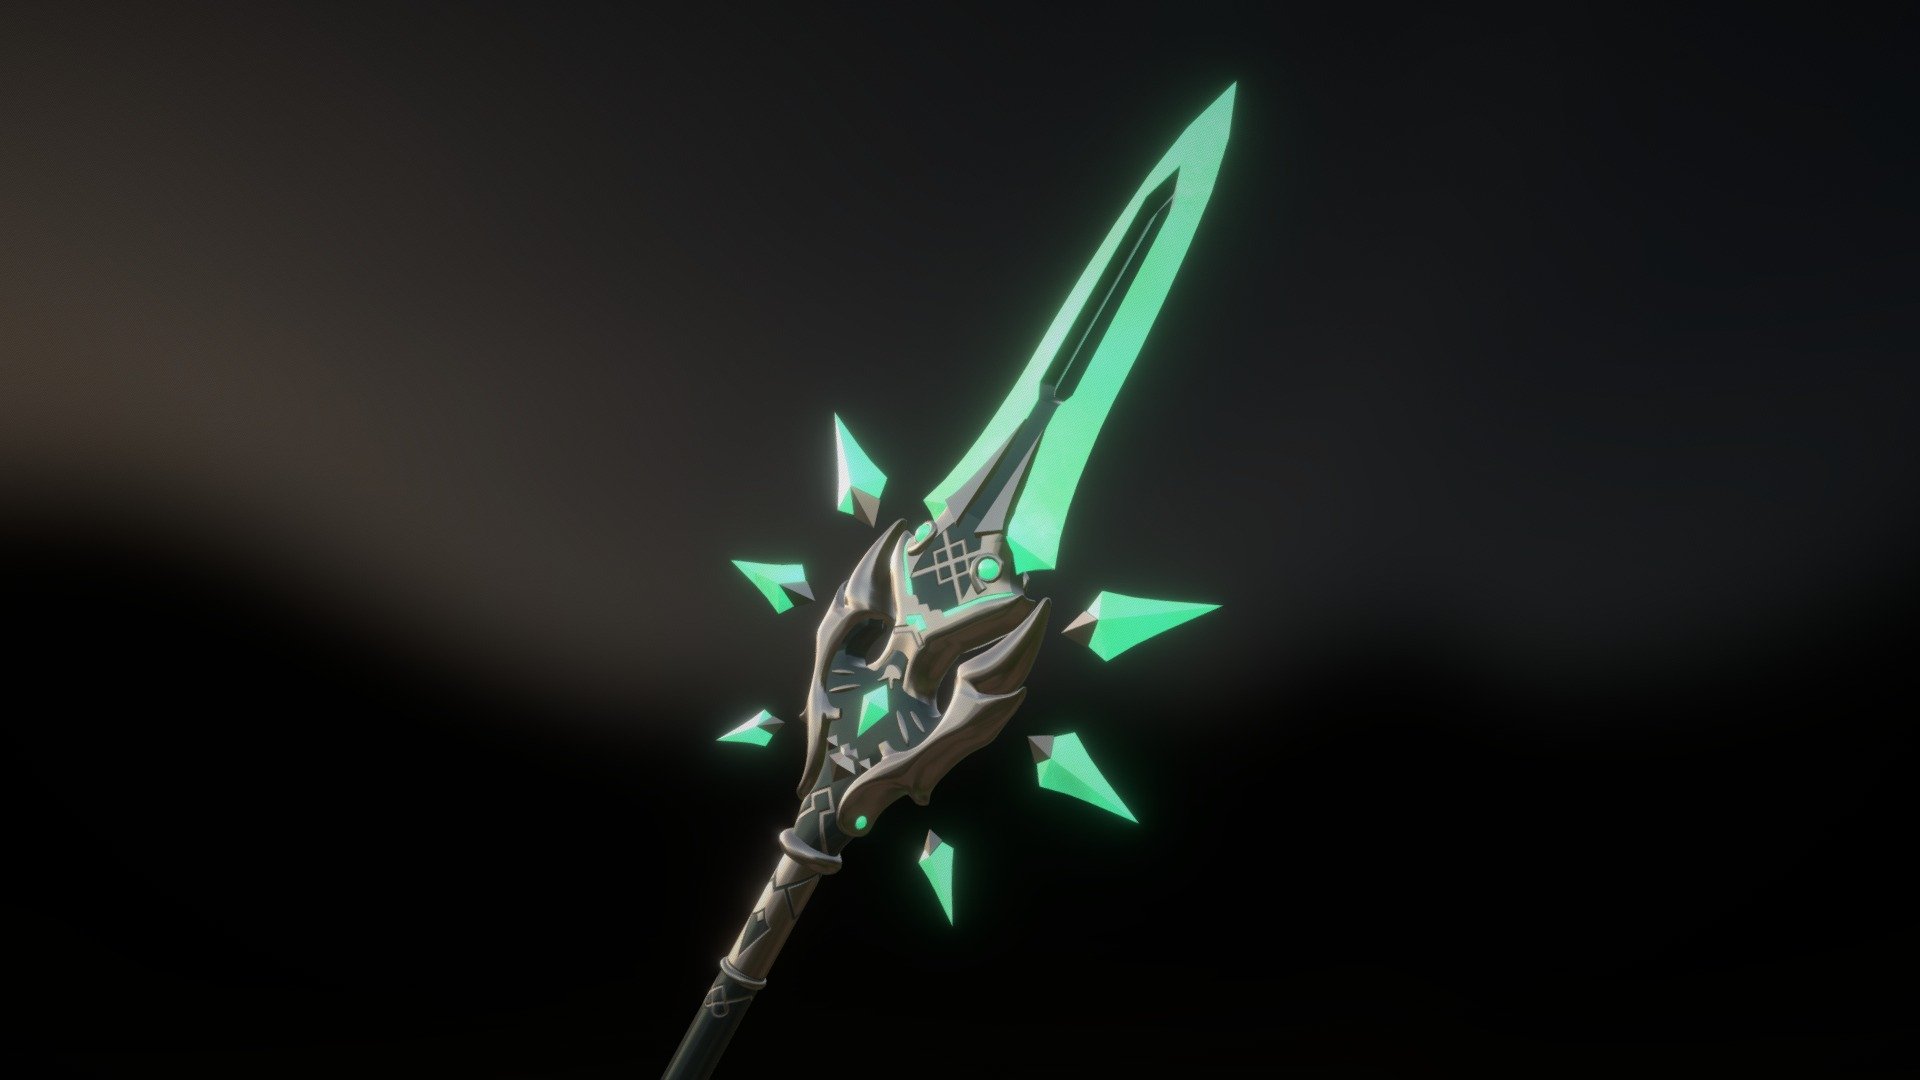 Fanart of the Primordial Jade Winged-Spear from Genshin Impact 3d model